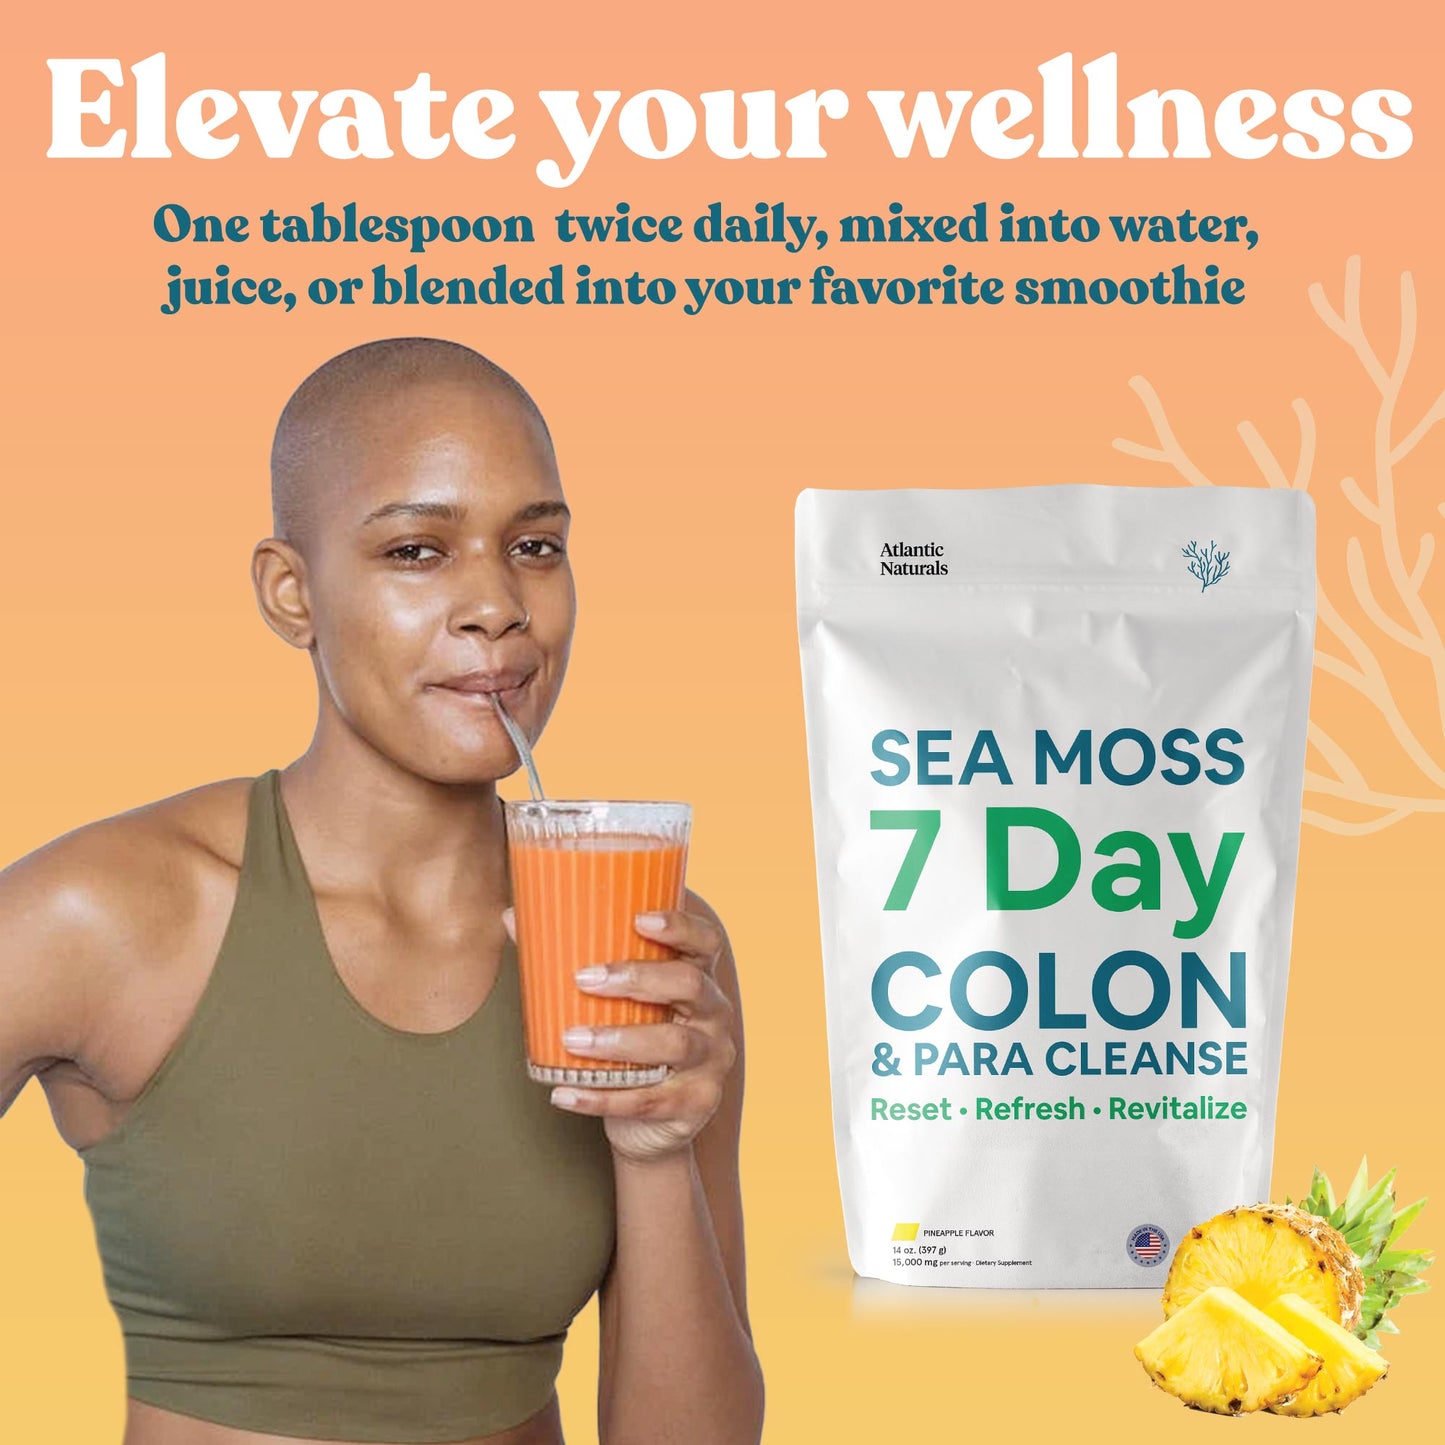 Sea Moss 7 Day Colon and Para Cleanse | Pineapple Flavor